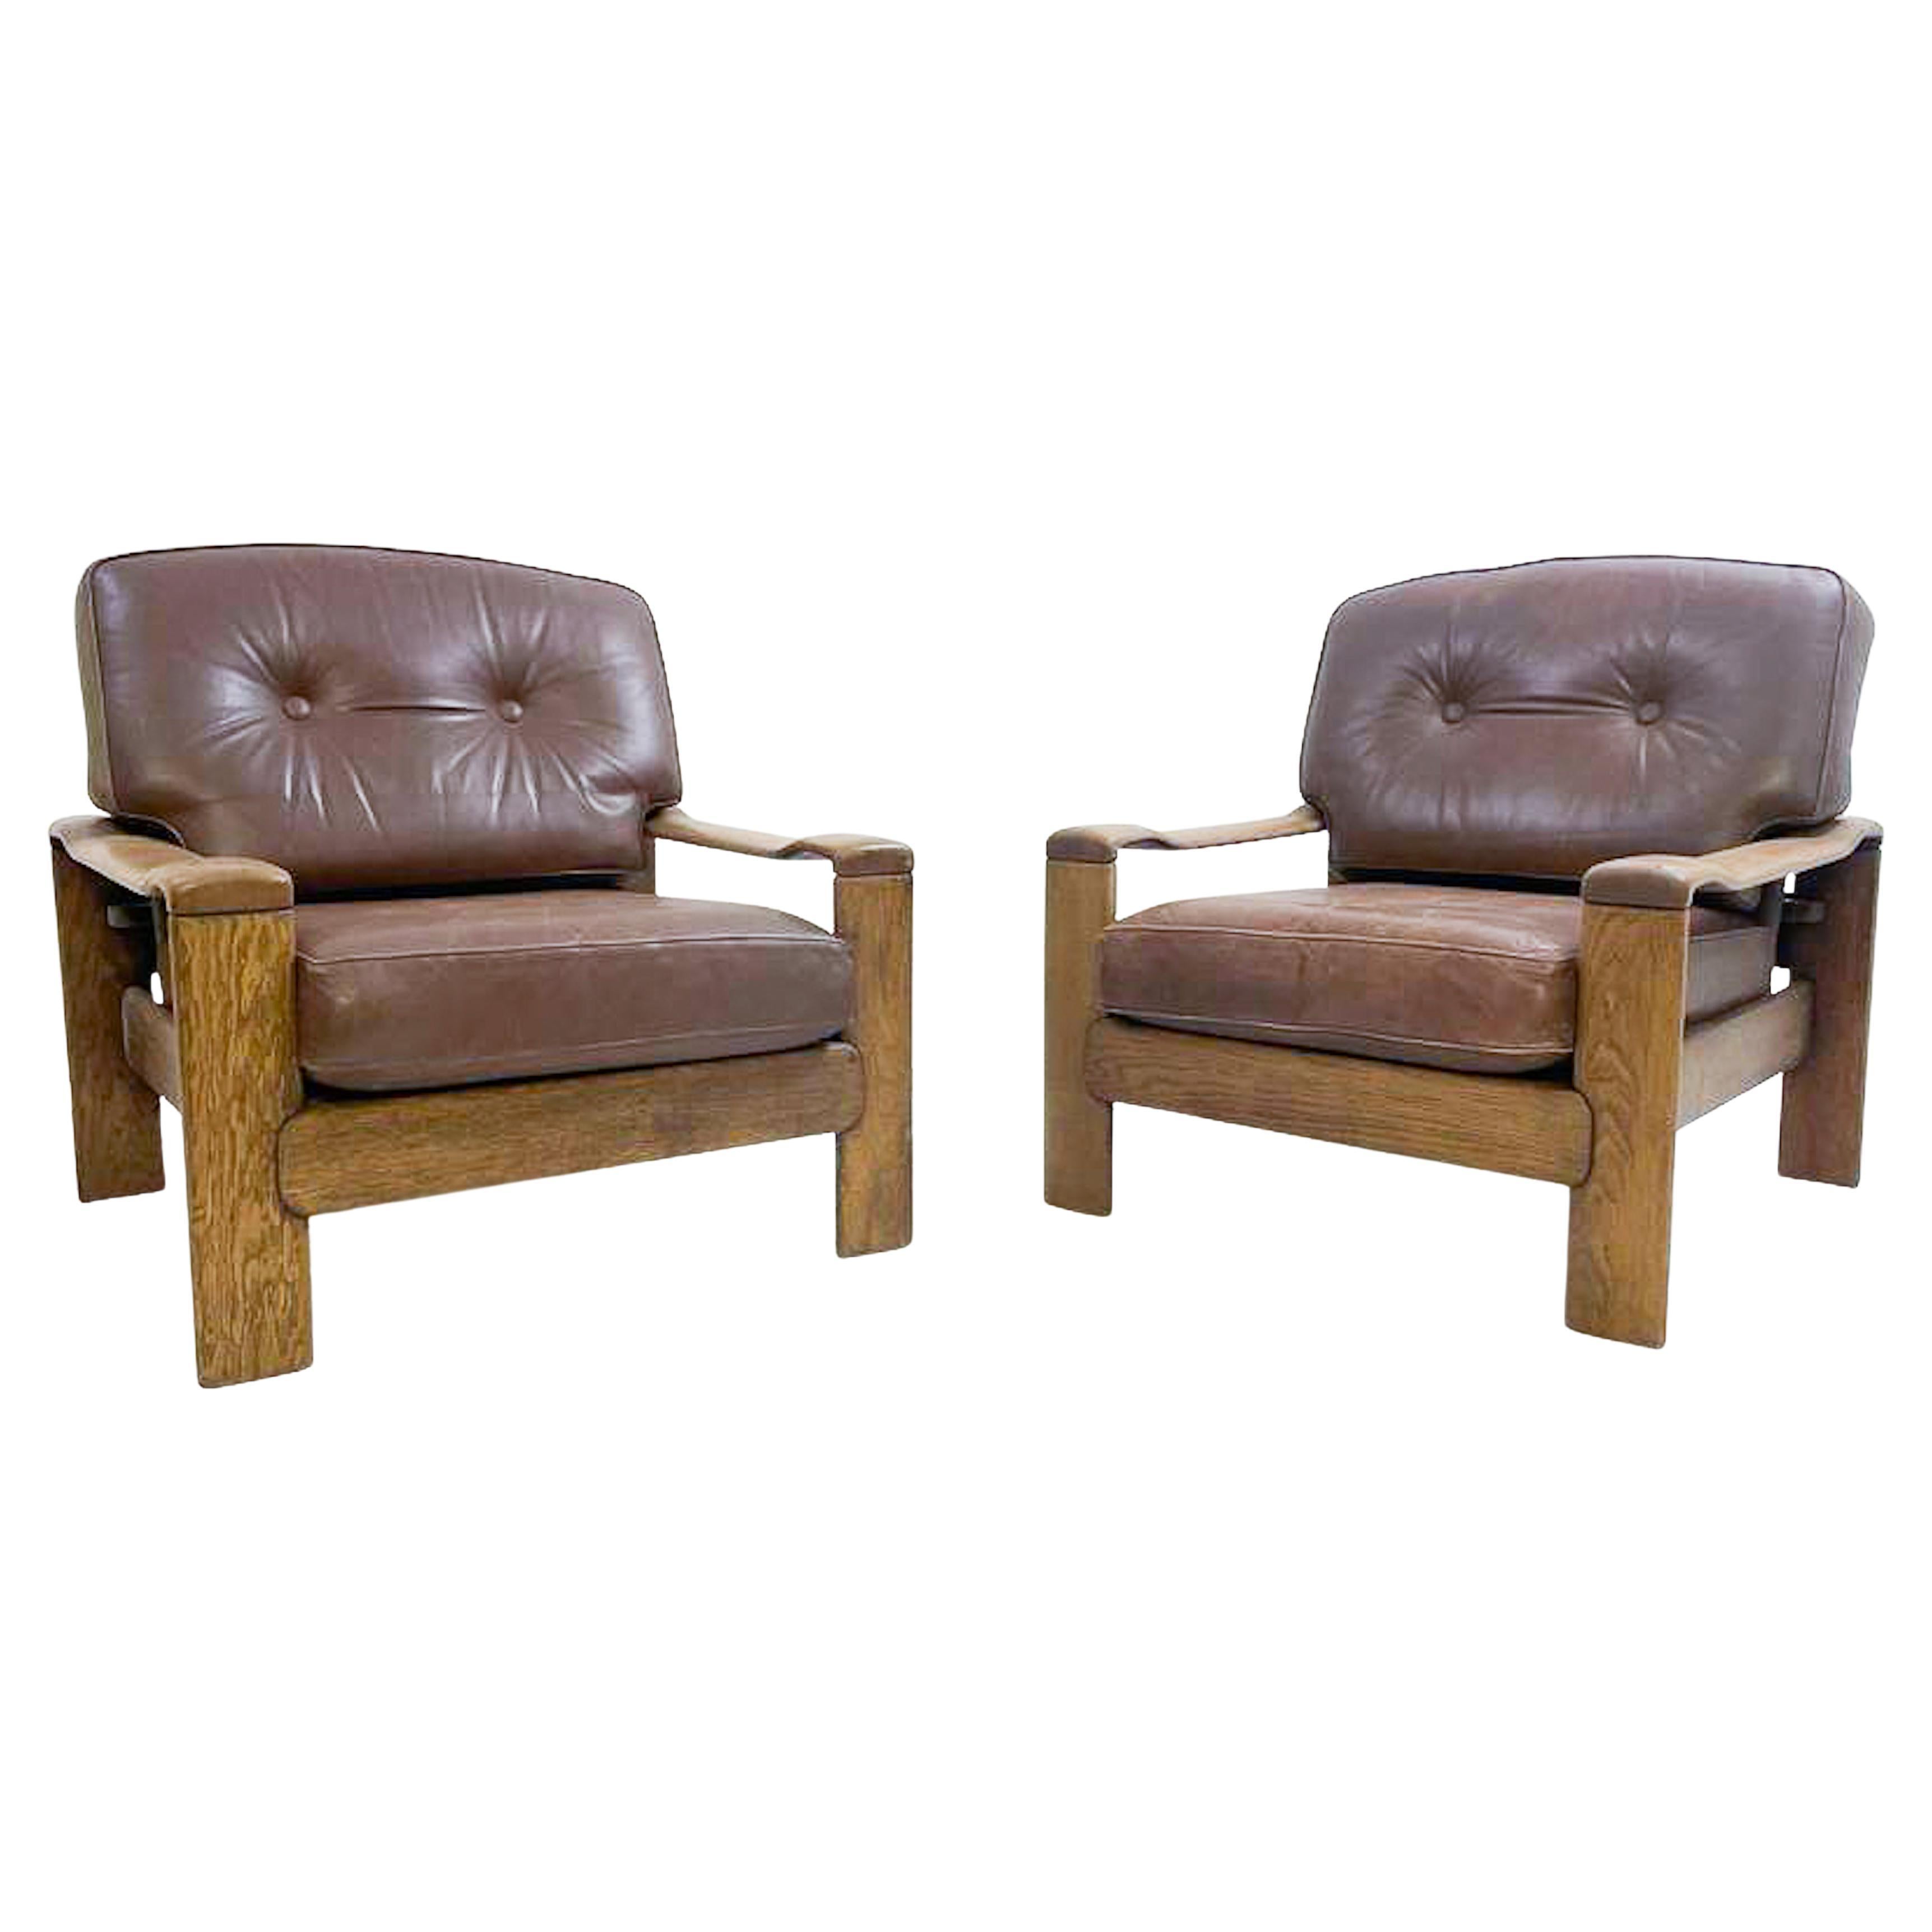 Mid-Century Modern Pair of Armchairs, Leather and Oak, 1960s For Sale